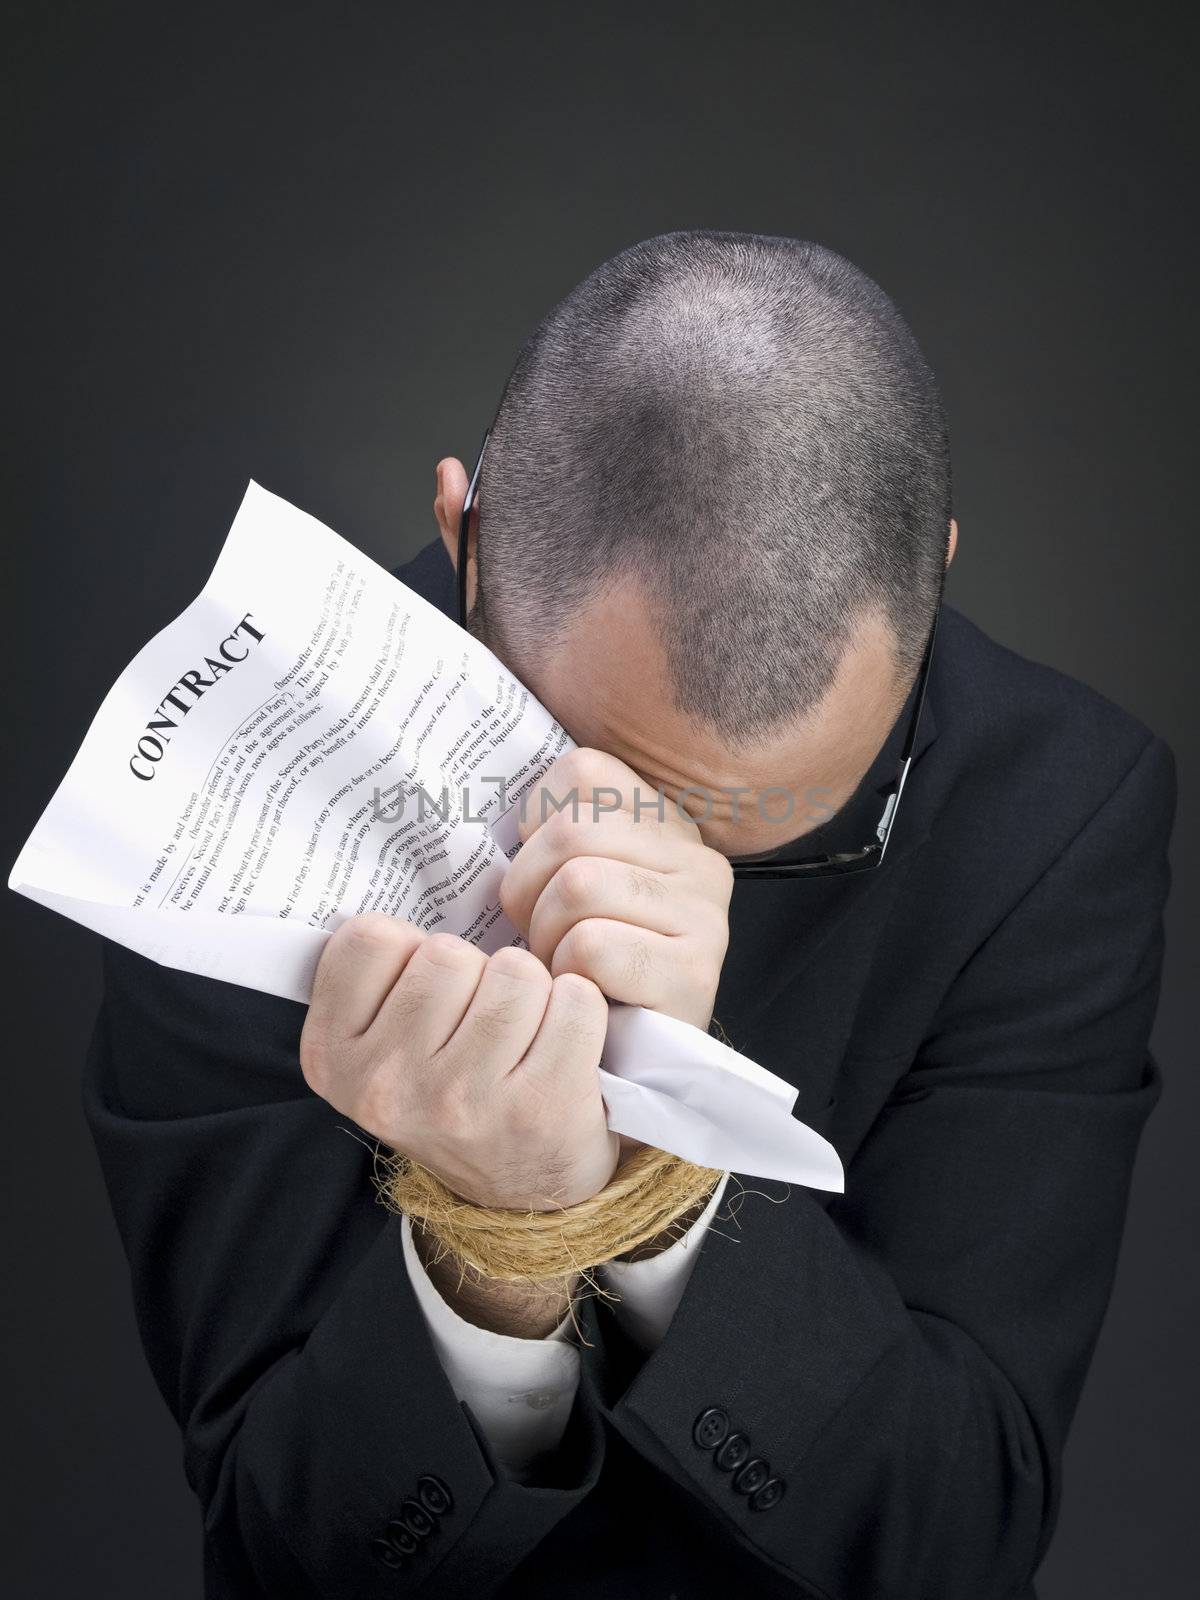 A man on a suit holds a contract on his tied hands.